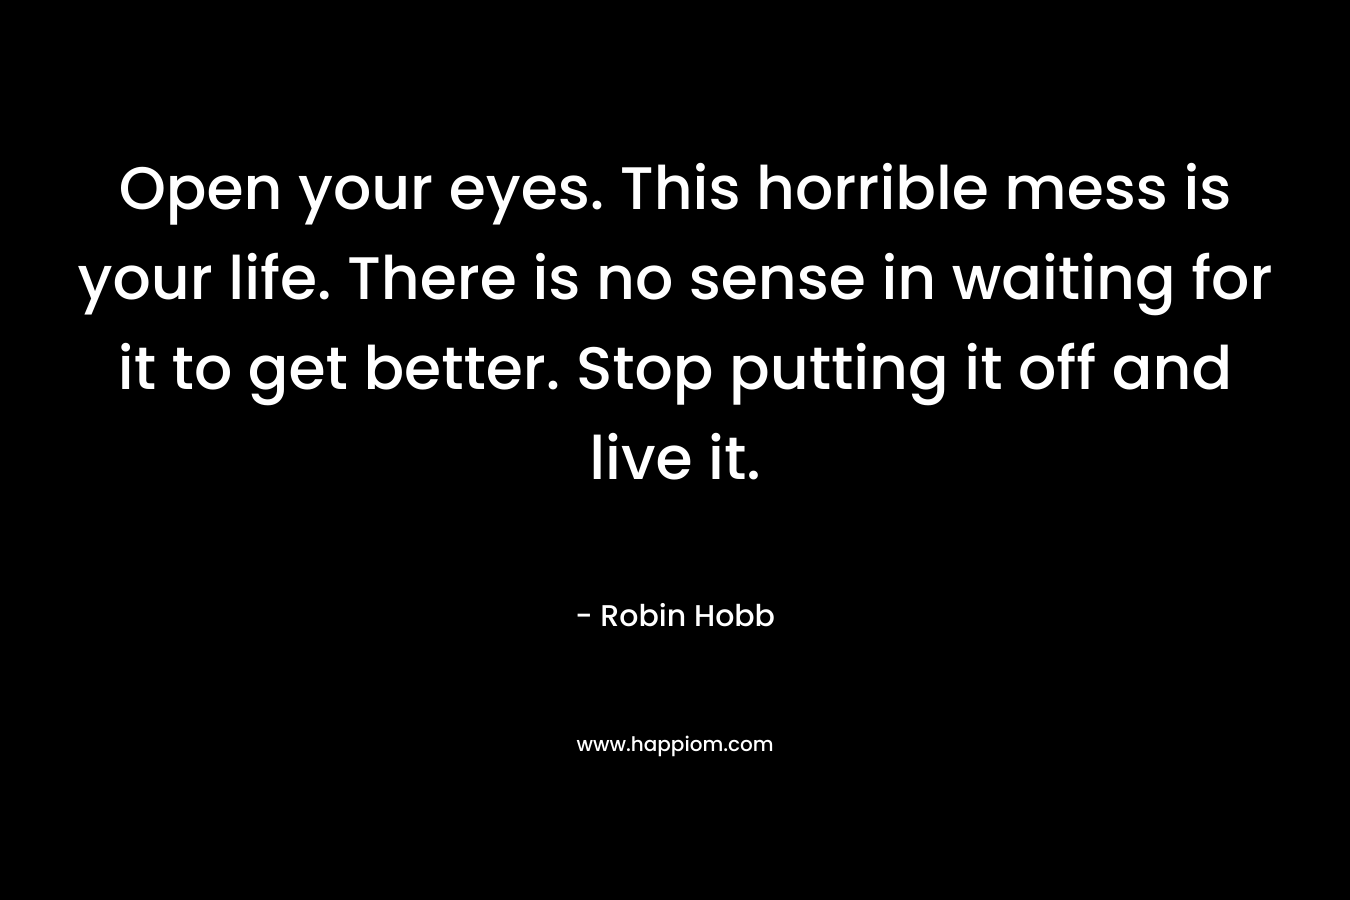 Open your eyes. This horrible mess is your life. There is no sense in waiting for it to get better. Stop putting it off and live it. – Robin Hobb